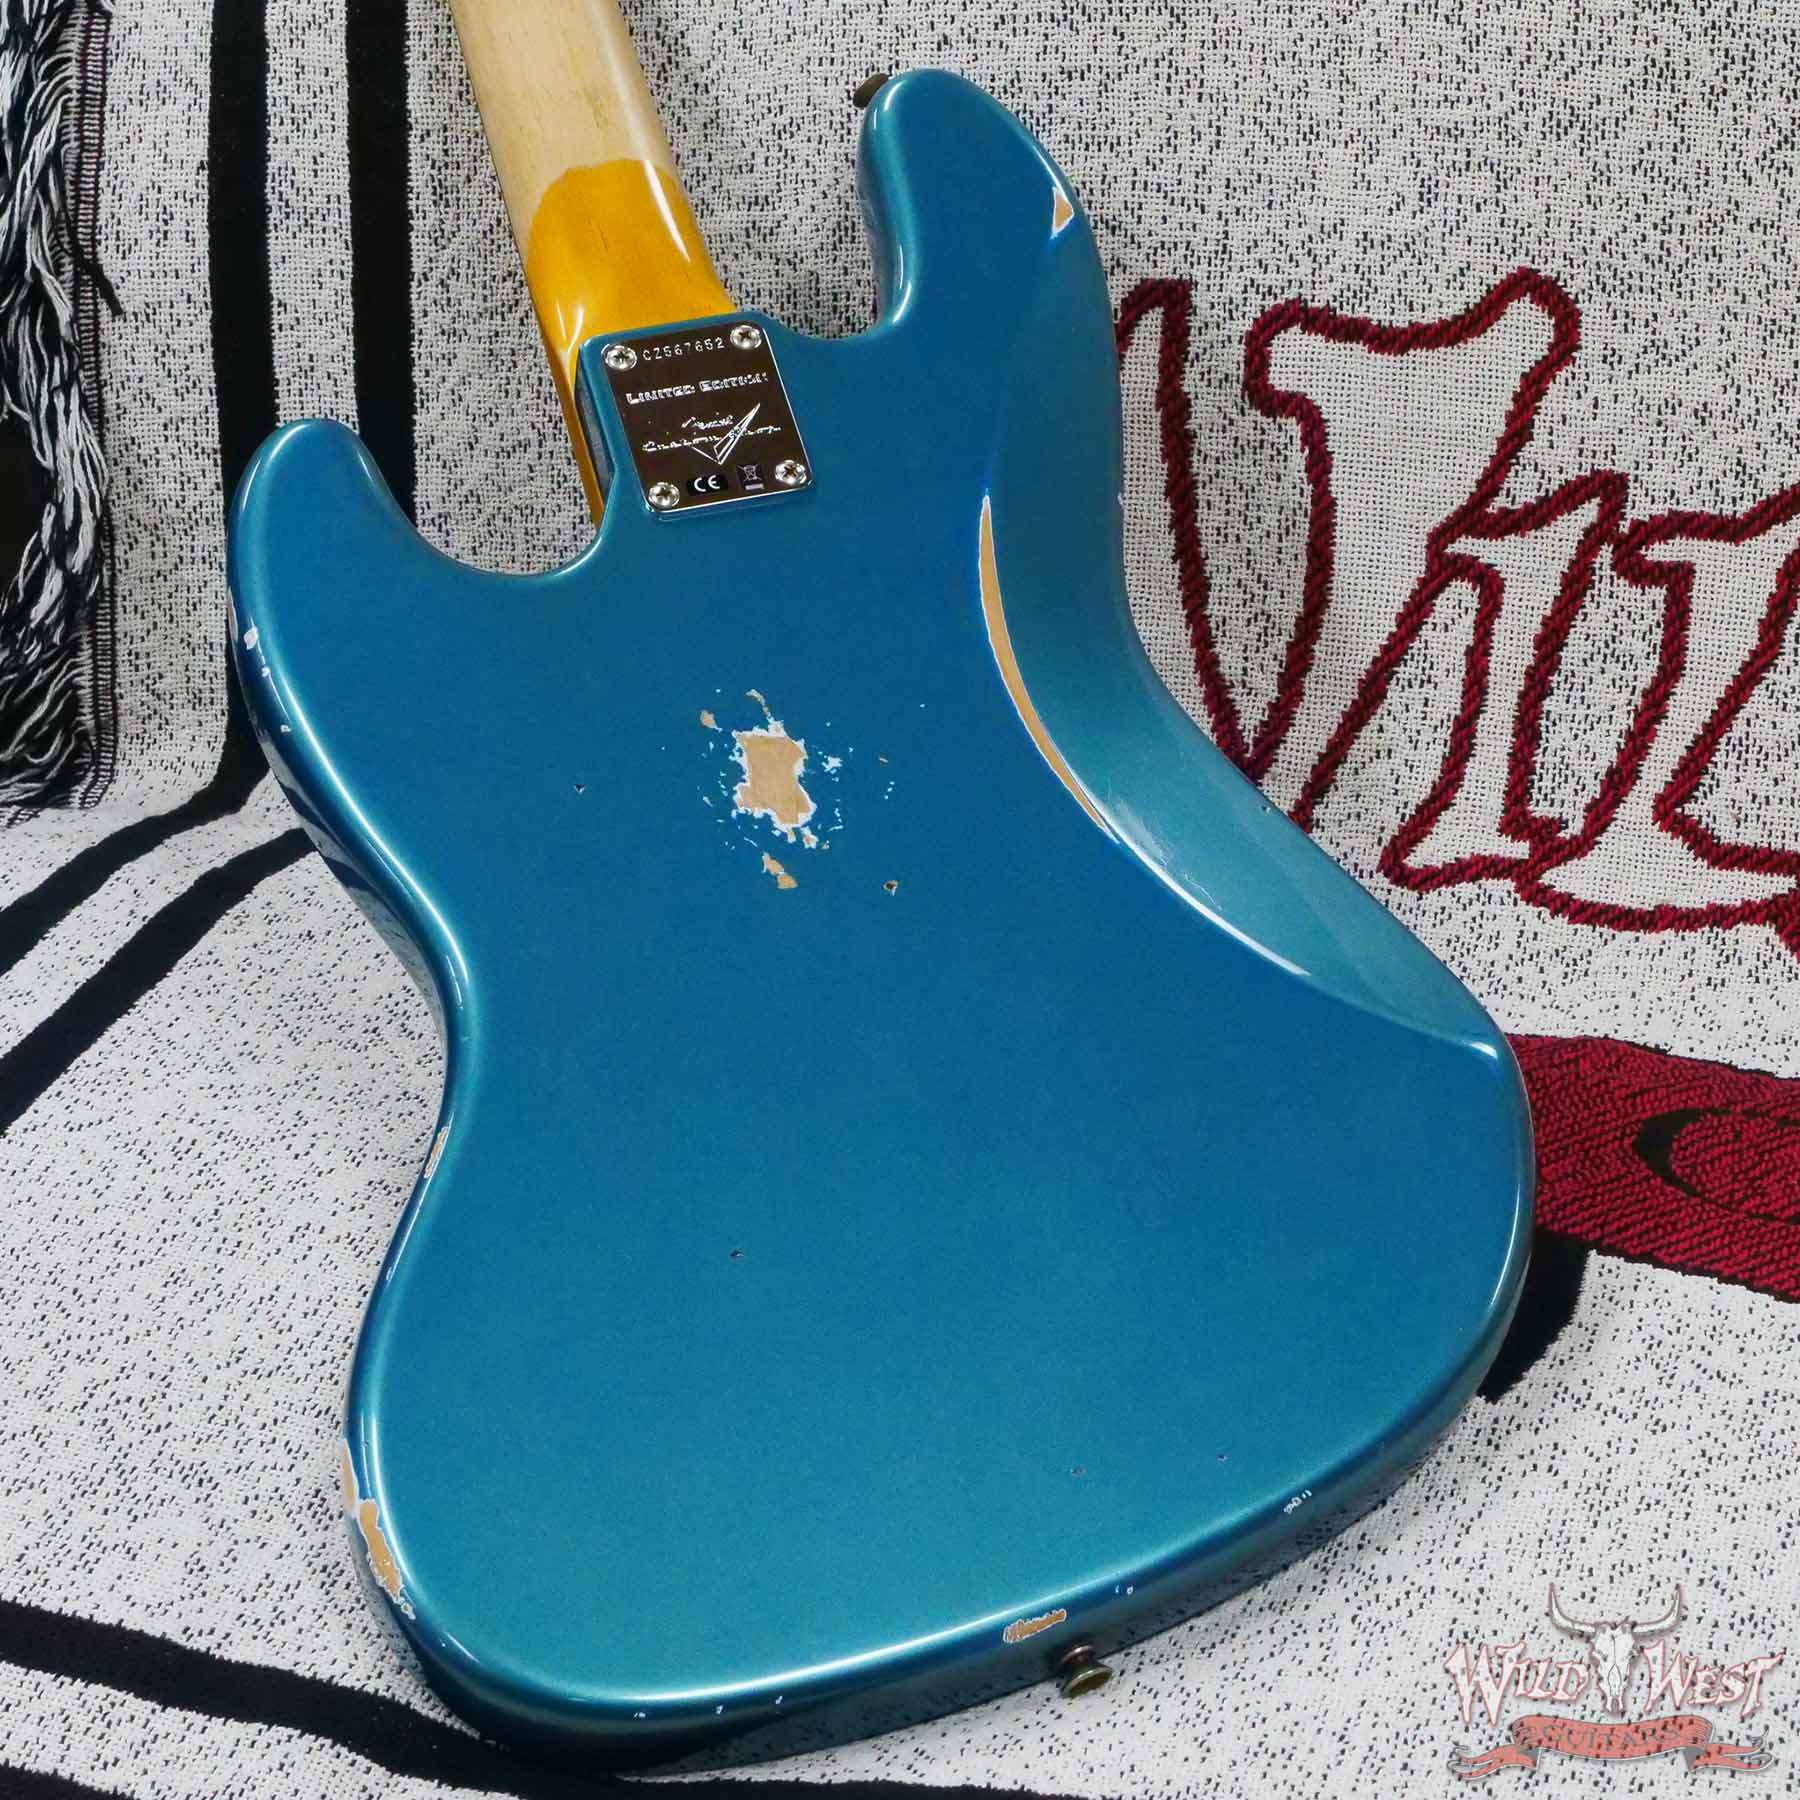 Fender Custom Shop Limited Edition 60 J-Bass 1960 Jazz Bass Hand-Wound  Pickups Relic Aged Ocean Turquoise